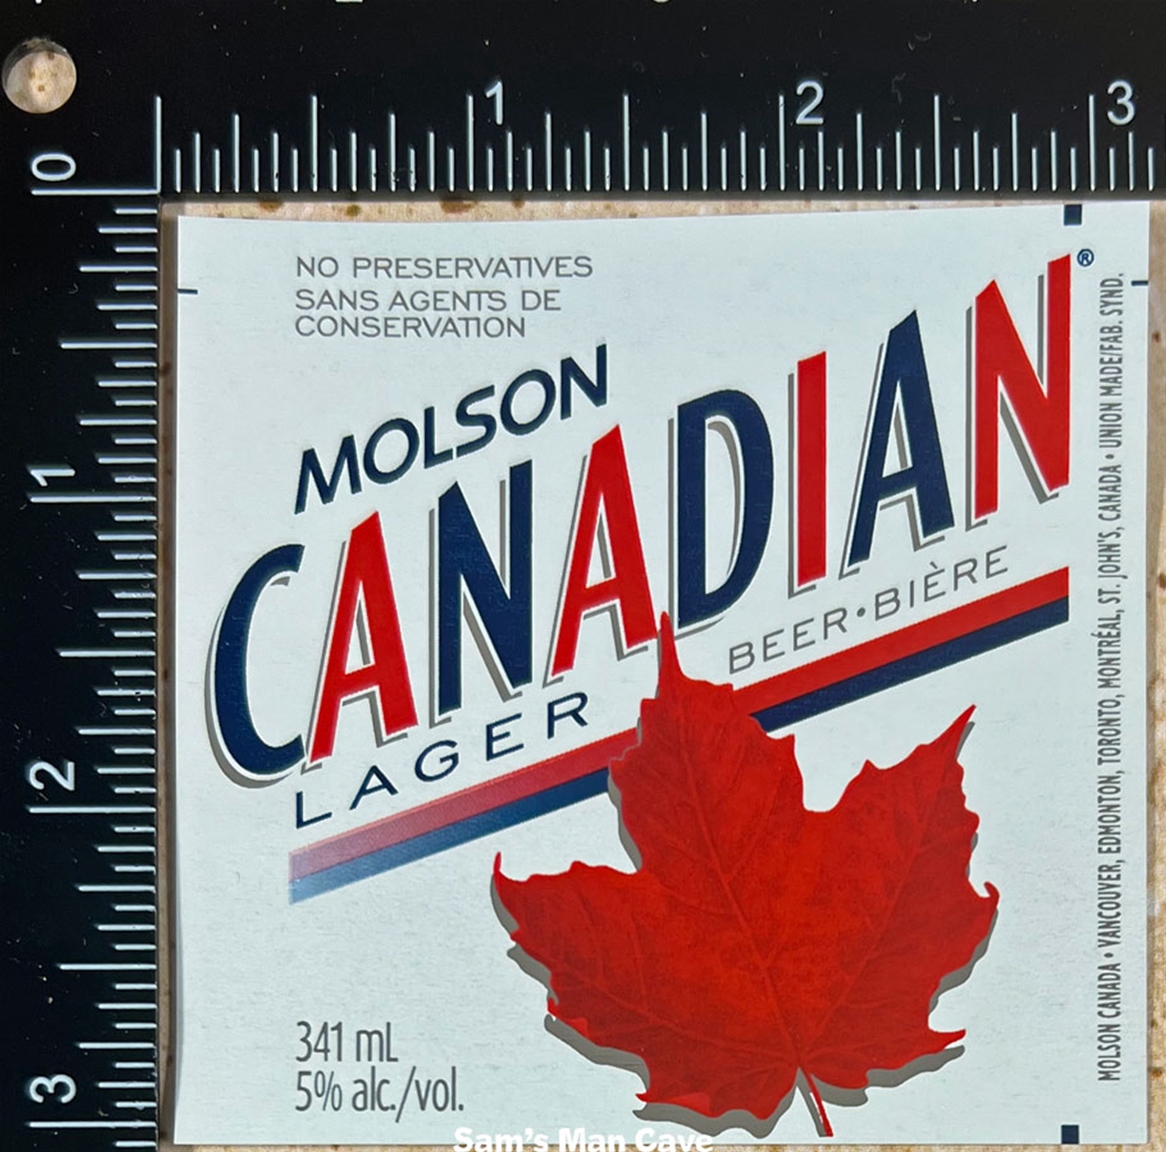 Molson Canadian Lager Label